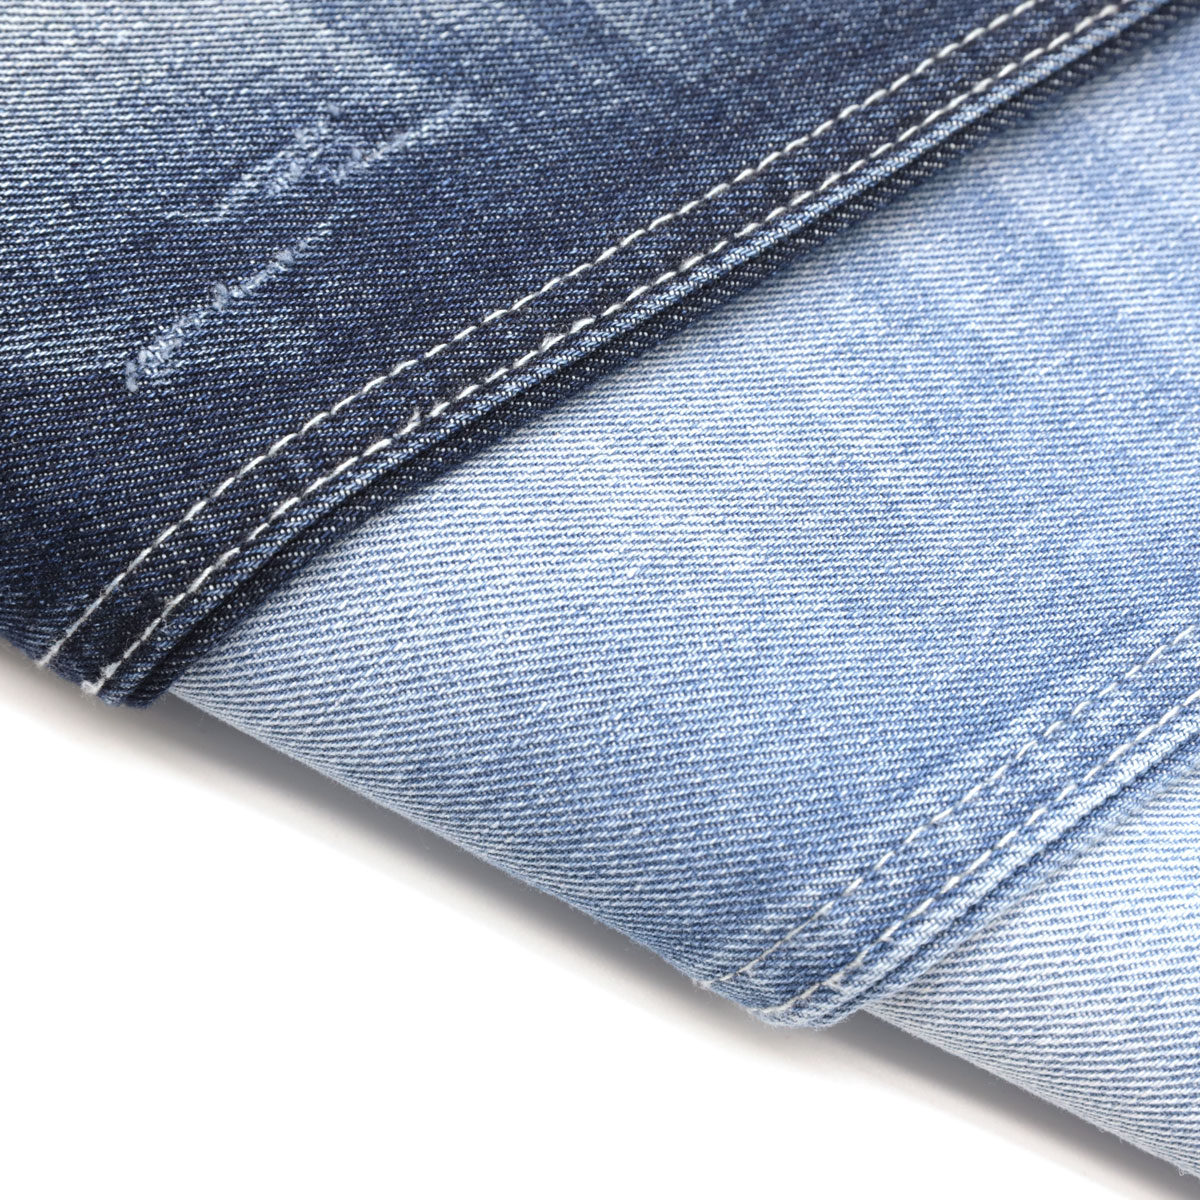 Dothing - the Perfect Denim Material Fabric 1